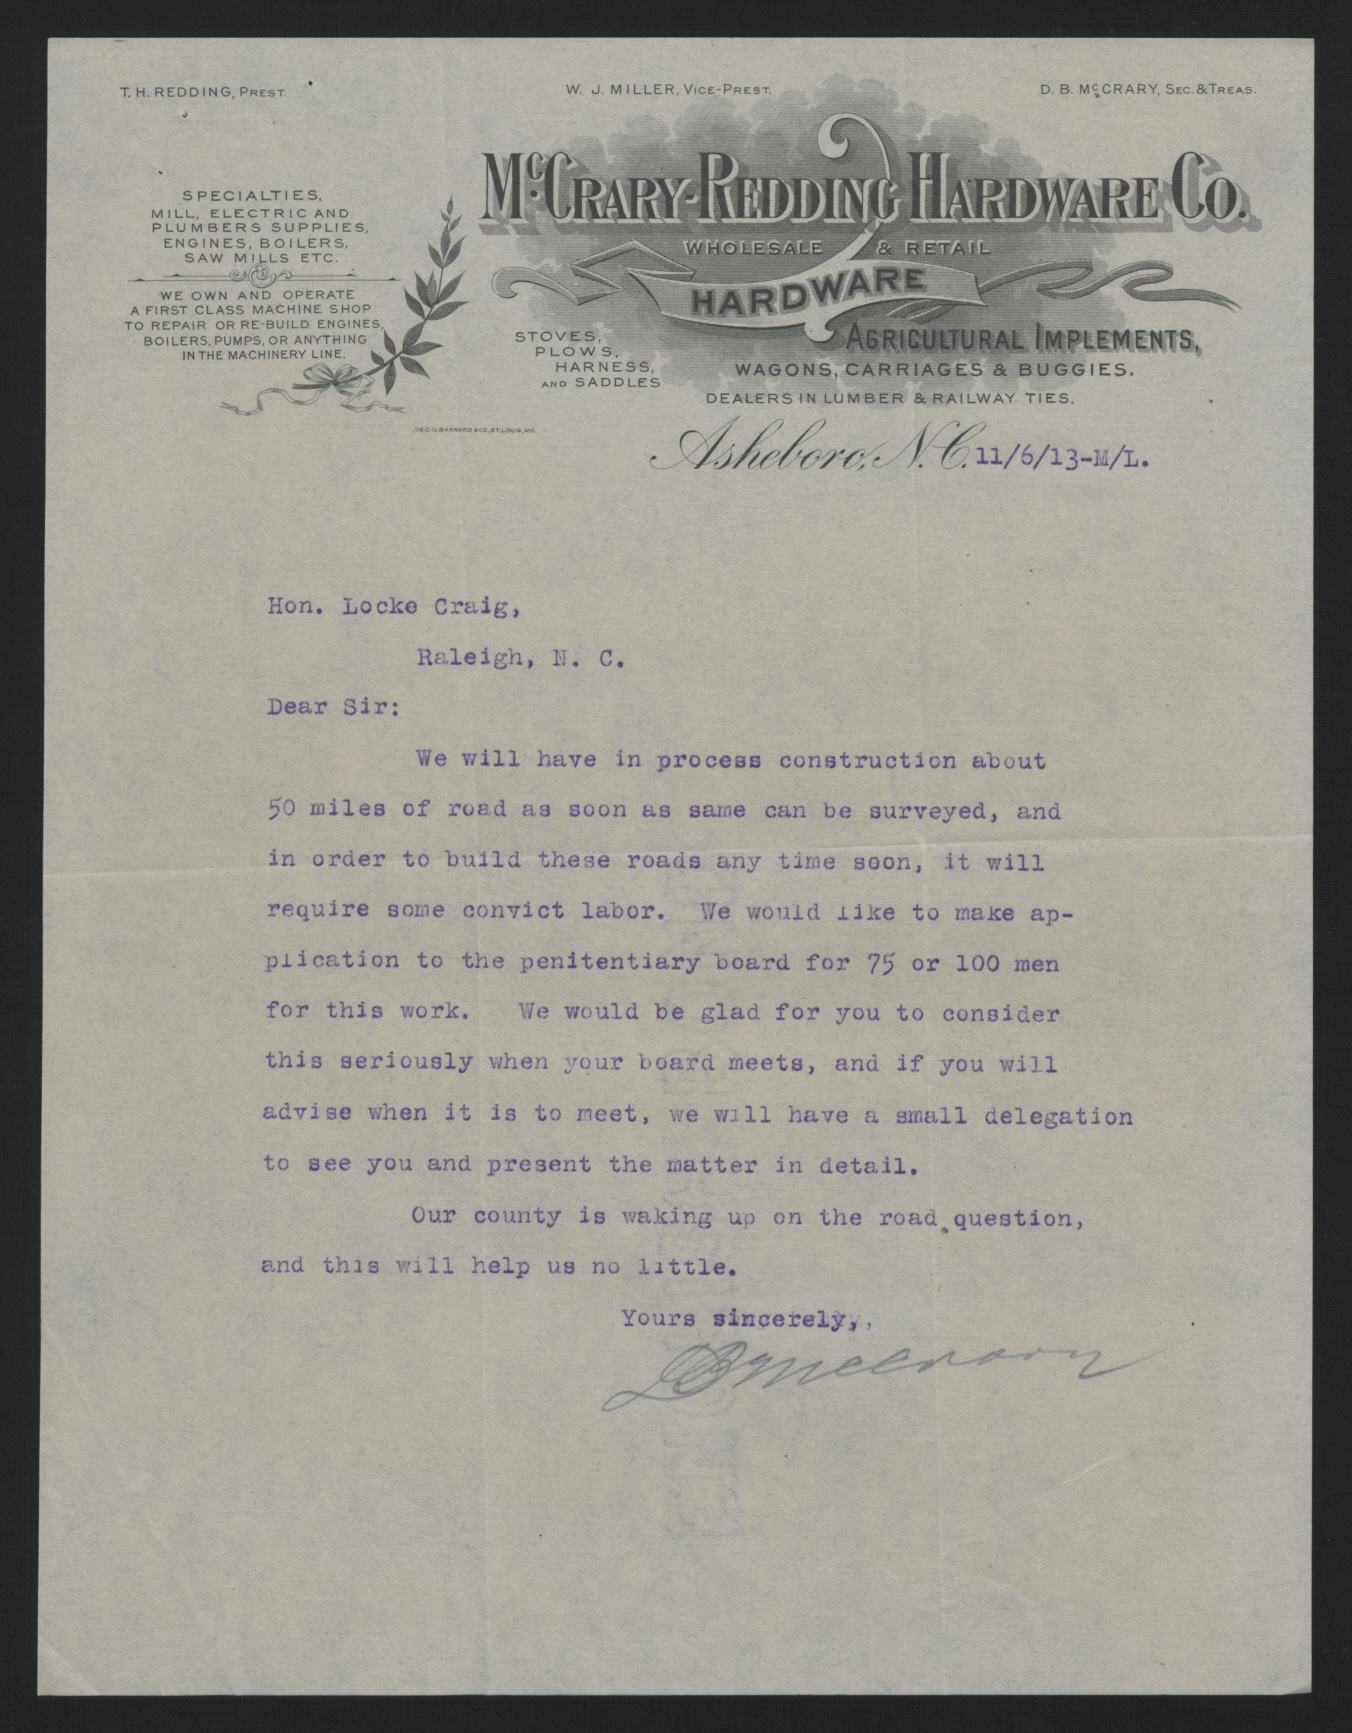 Letter from McCrary to Craig, November 6, 1913